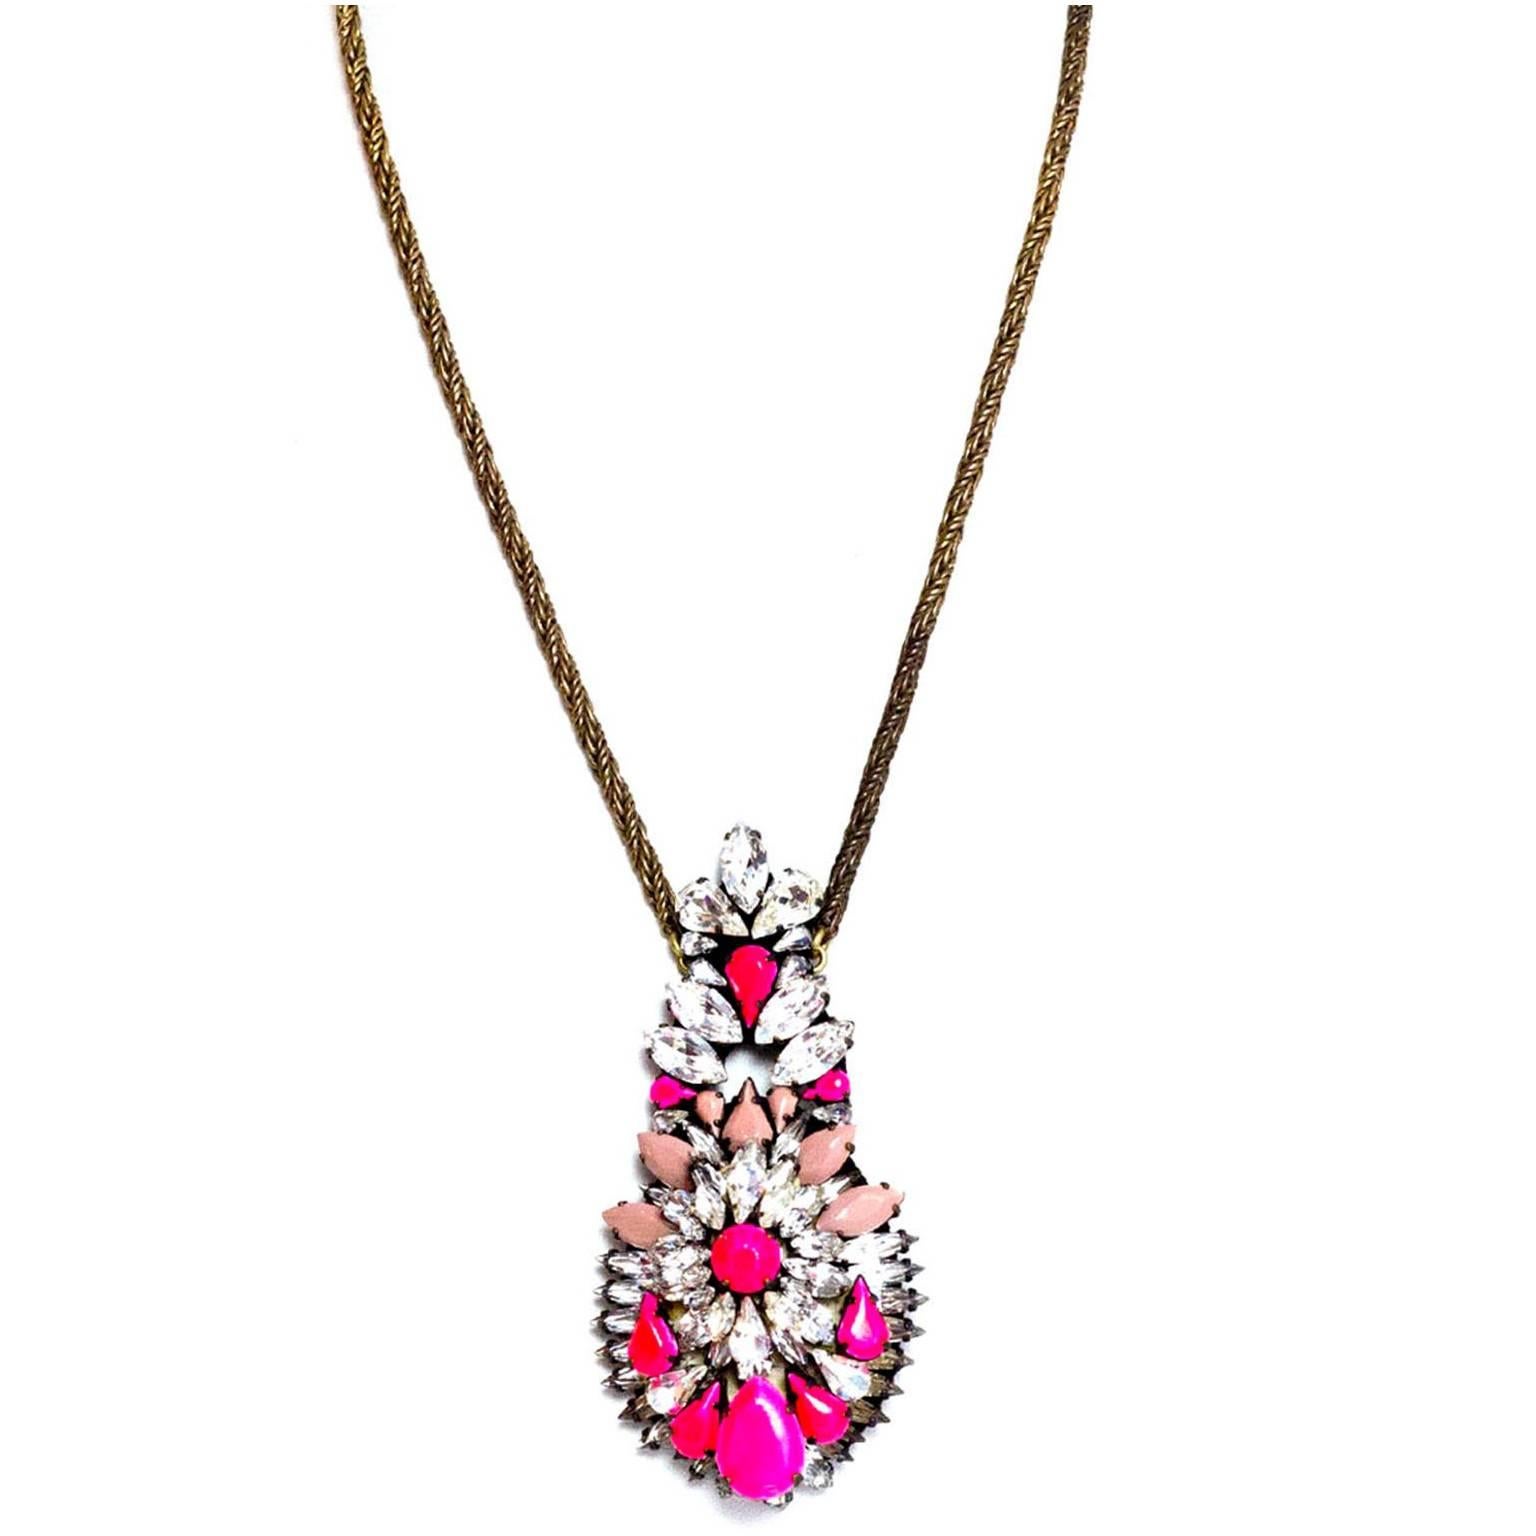 Shourouk Neon Pink/Clear Crystal Leitmotiv Zambia Necklace 